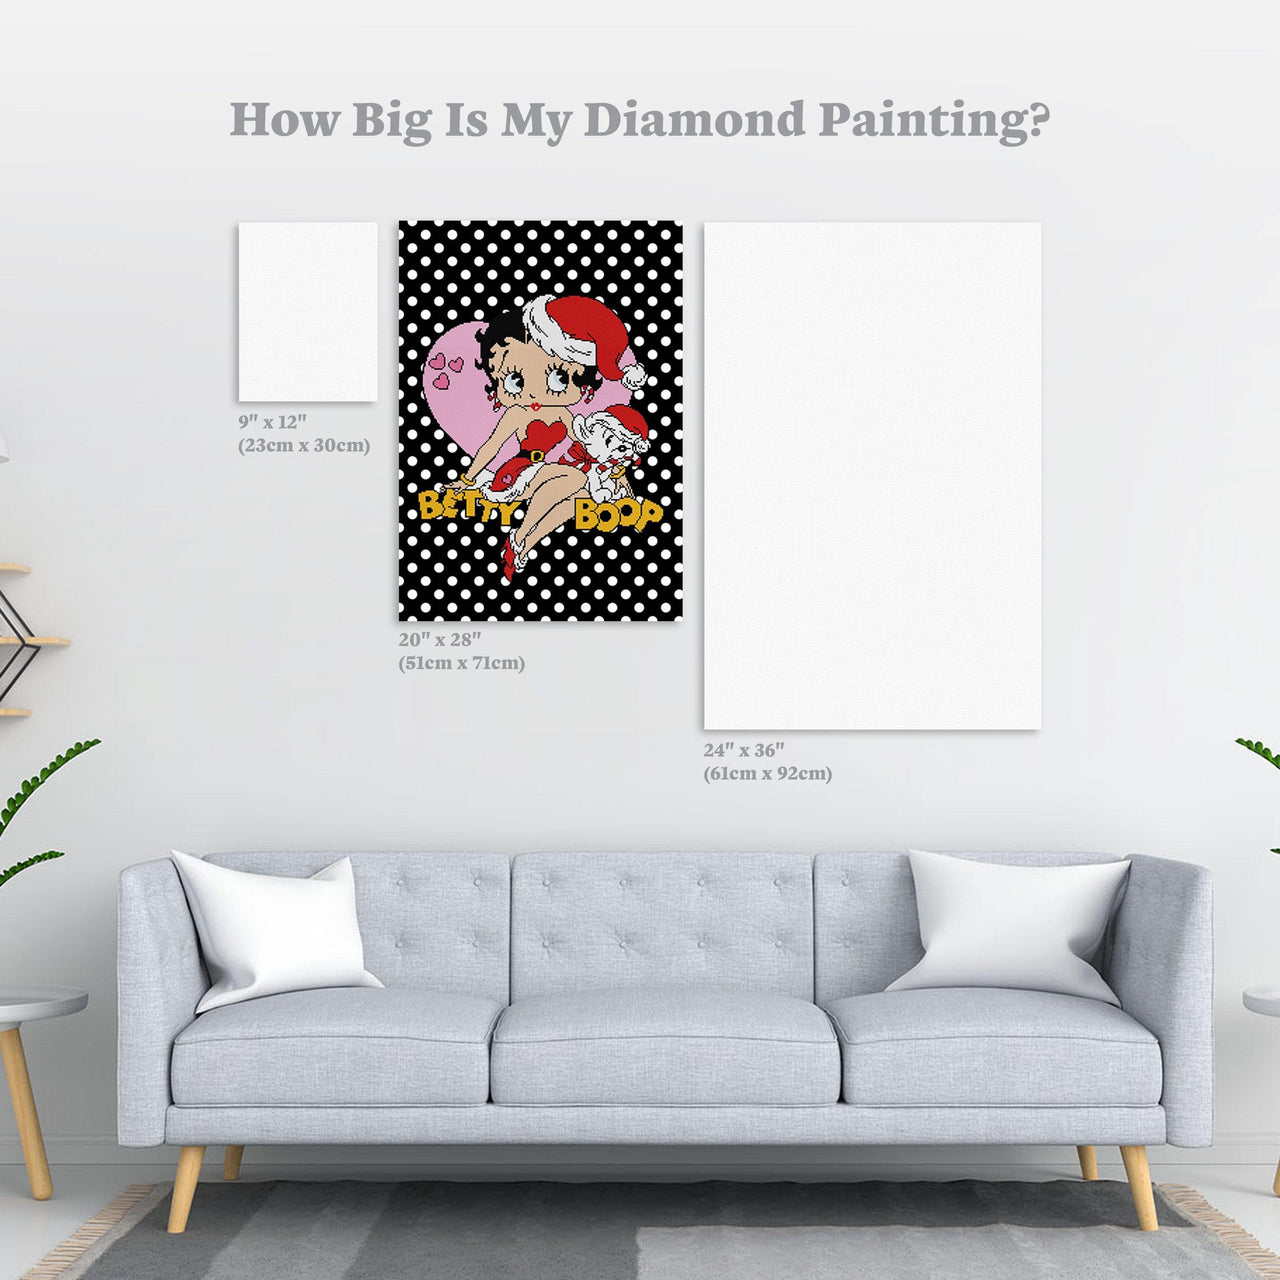 Diamond Painting Betty Boop and Pudgy 20" x 28″ (51cm x 71cm) / Square with 8 Colors including 1 AB / 22,180